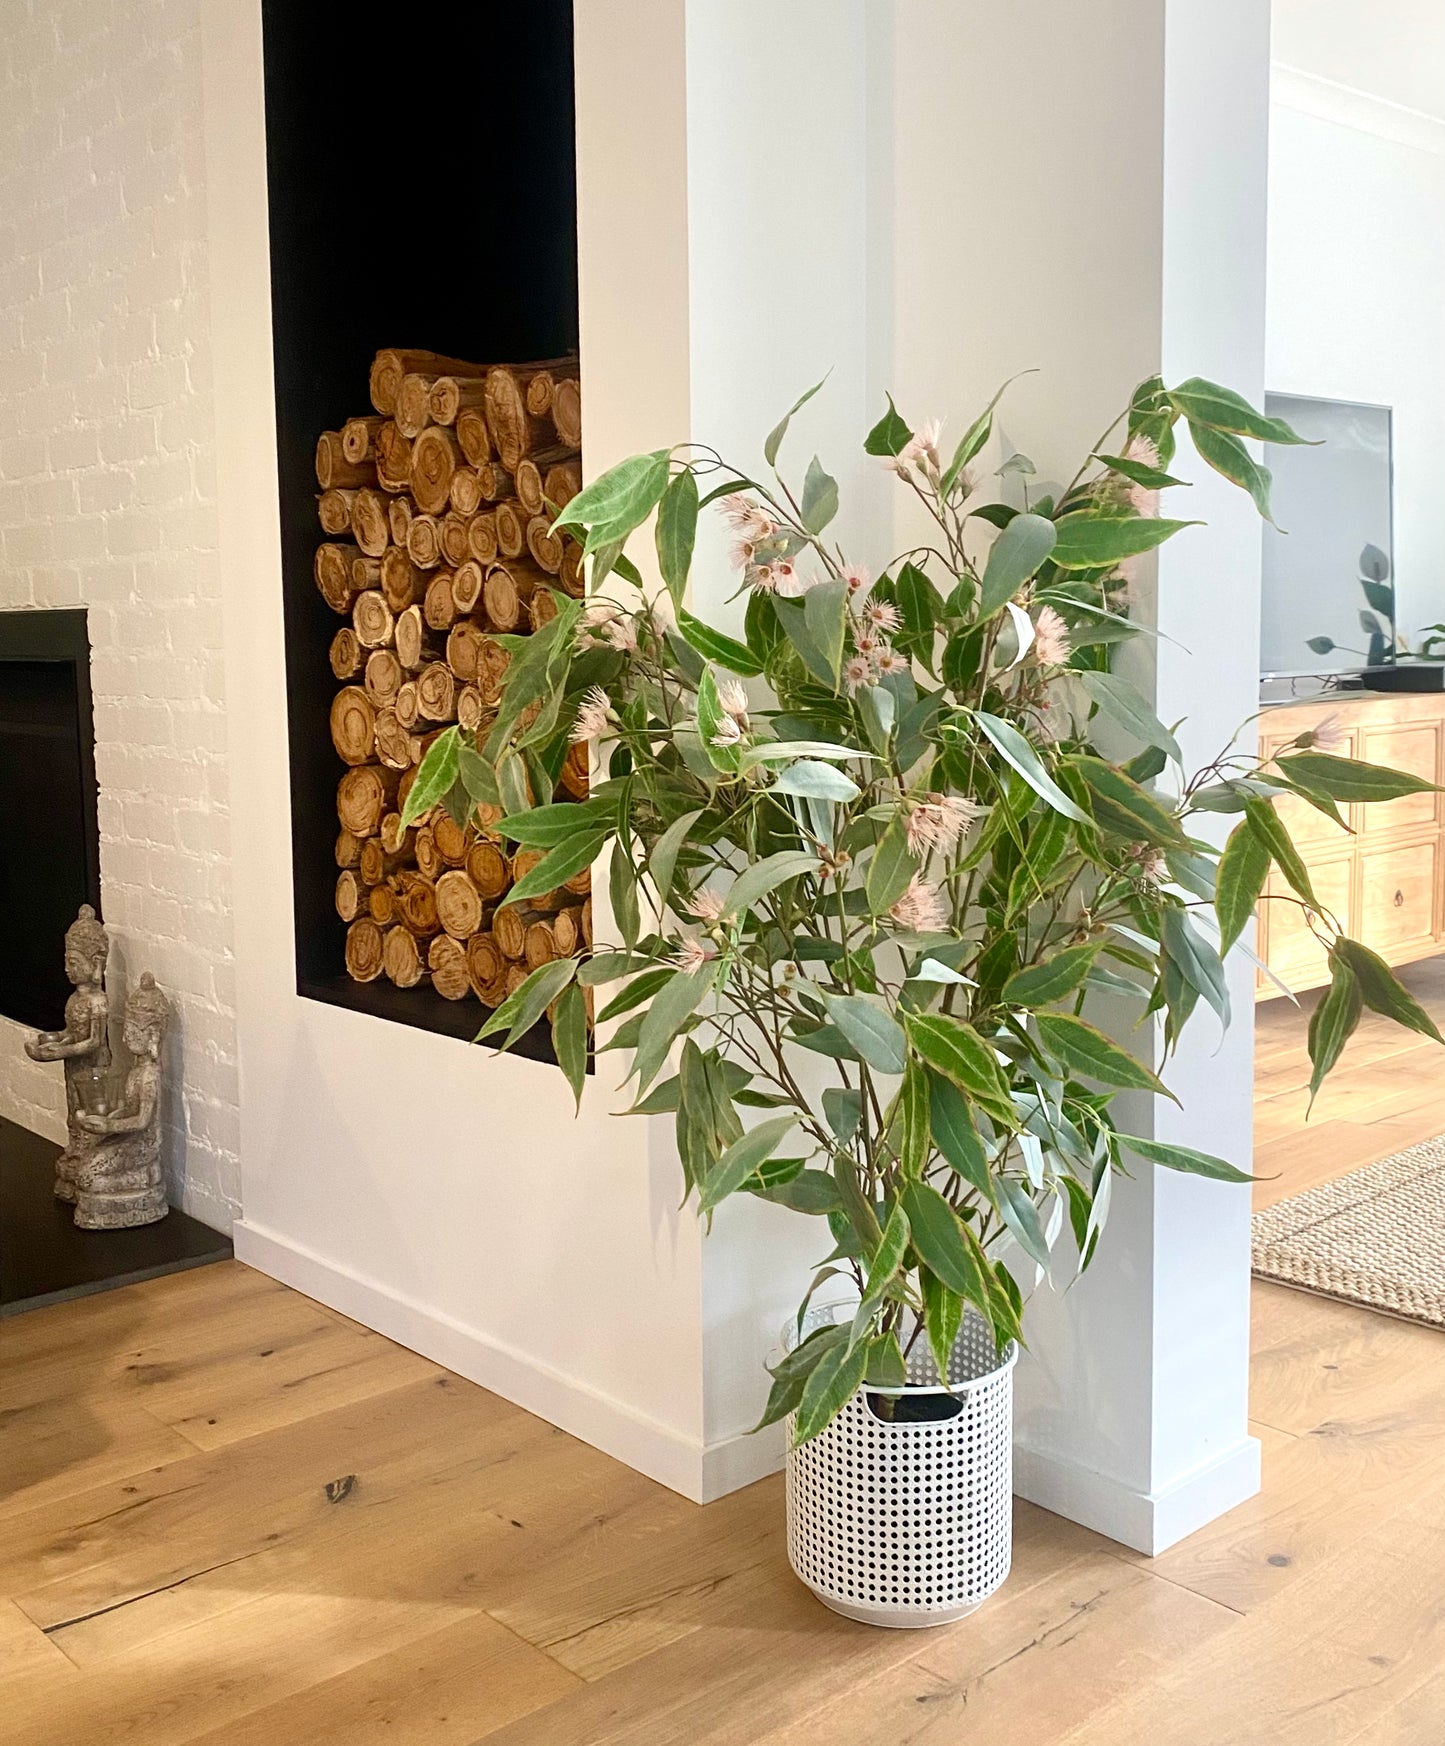 The Flowering Eucalyptus Tree: Hassle-Free Nature for Your Space